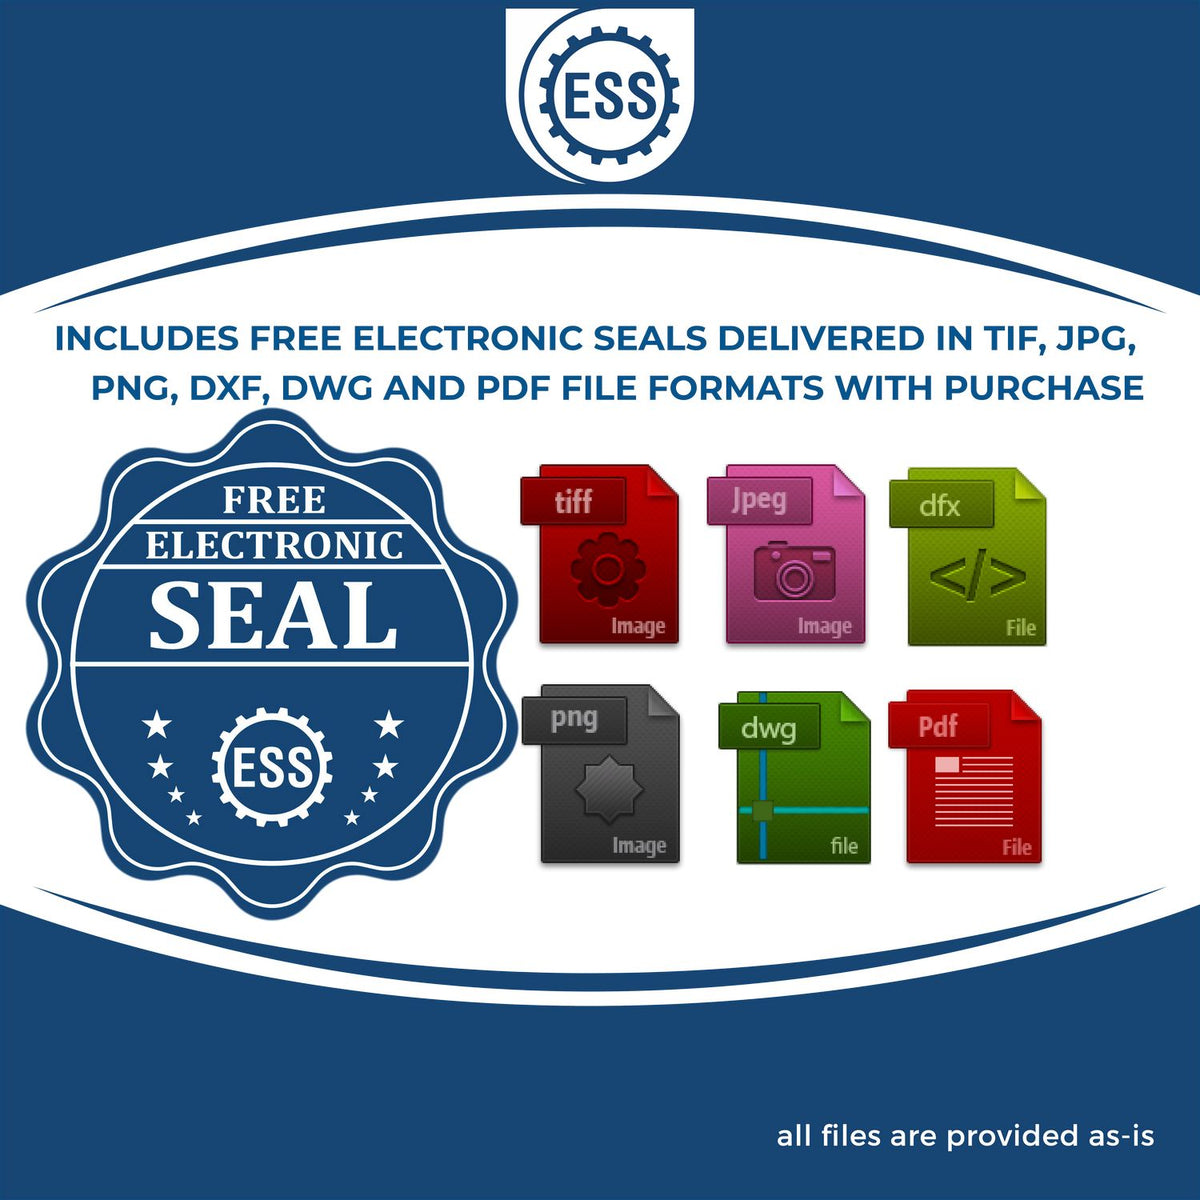 An infographic for the free electronic seal for the Premium MaxLight Pre-Inked Montana Engineering Stamp illustrating the different file type icons such as DXF, DWG, TIF, JPG and PNG.